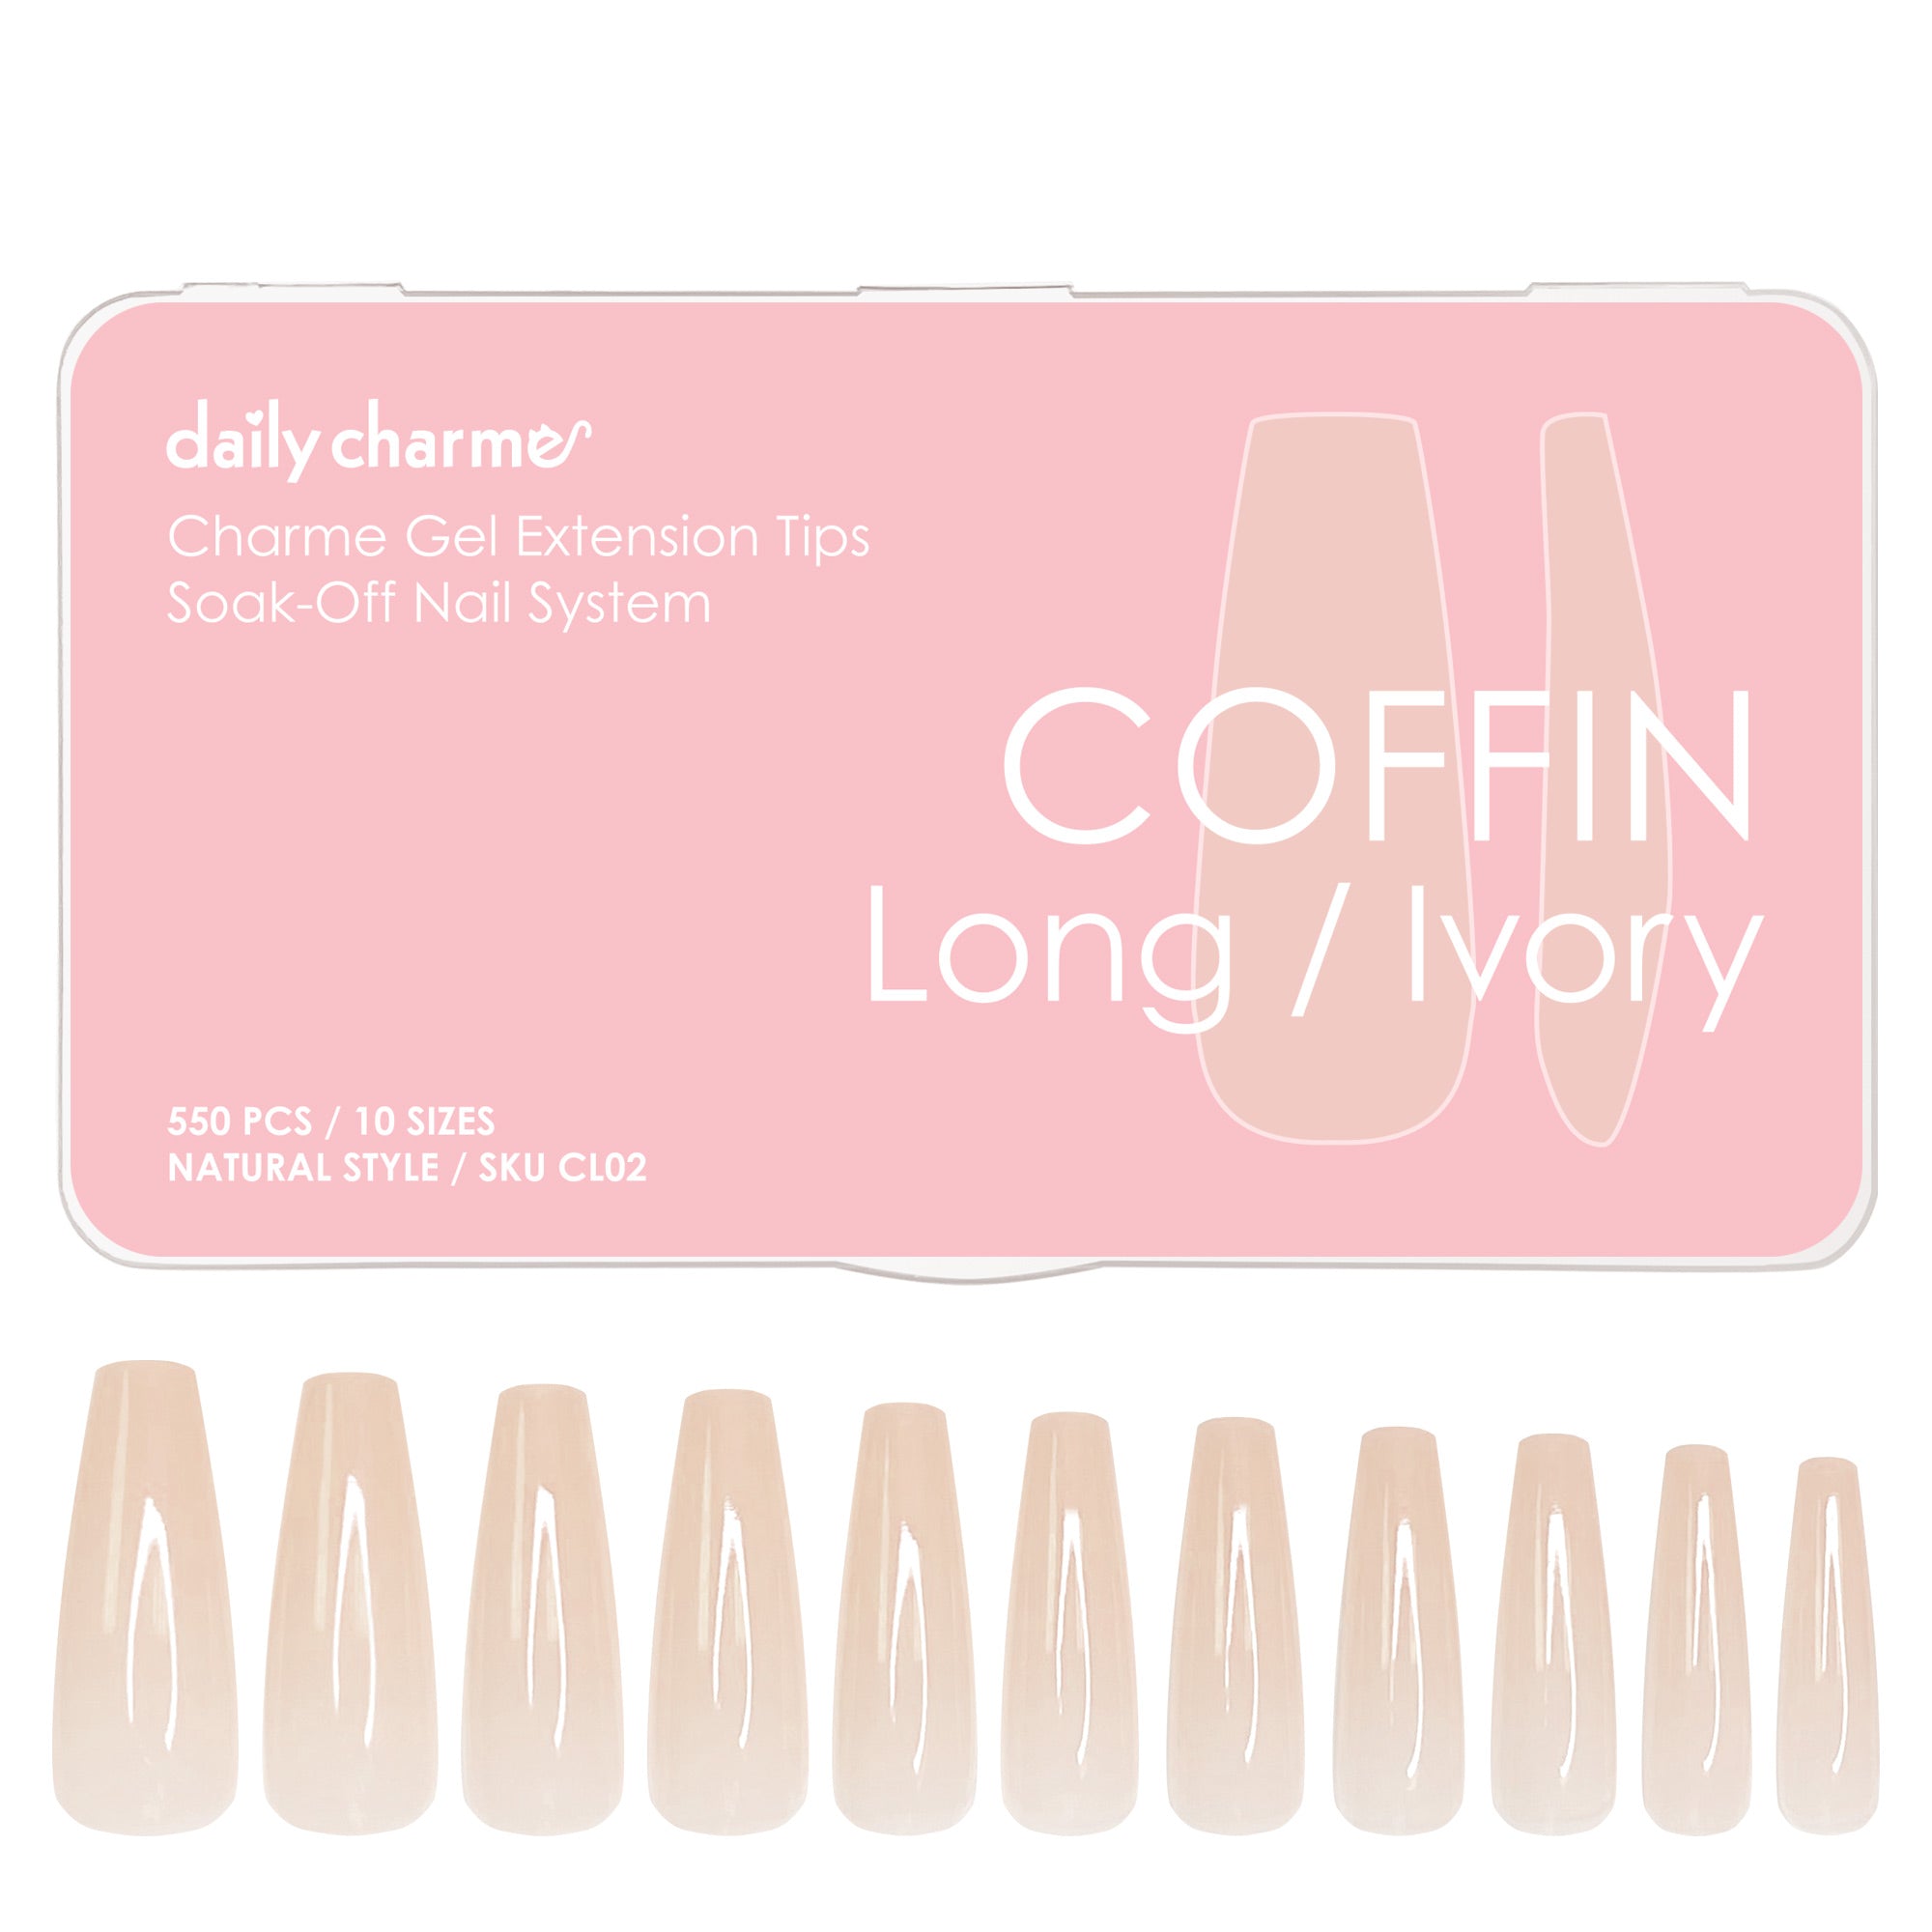 Charme Gel Extension Tips / Coffin / Long / Ivory Nail Chips